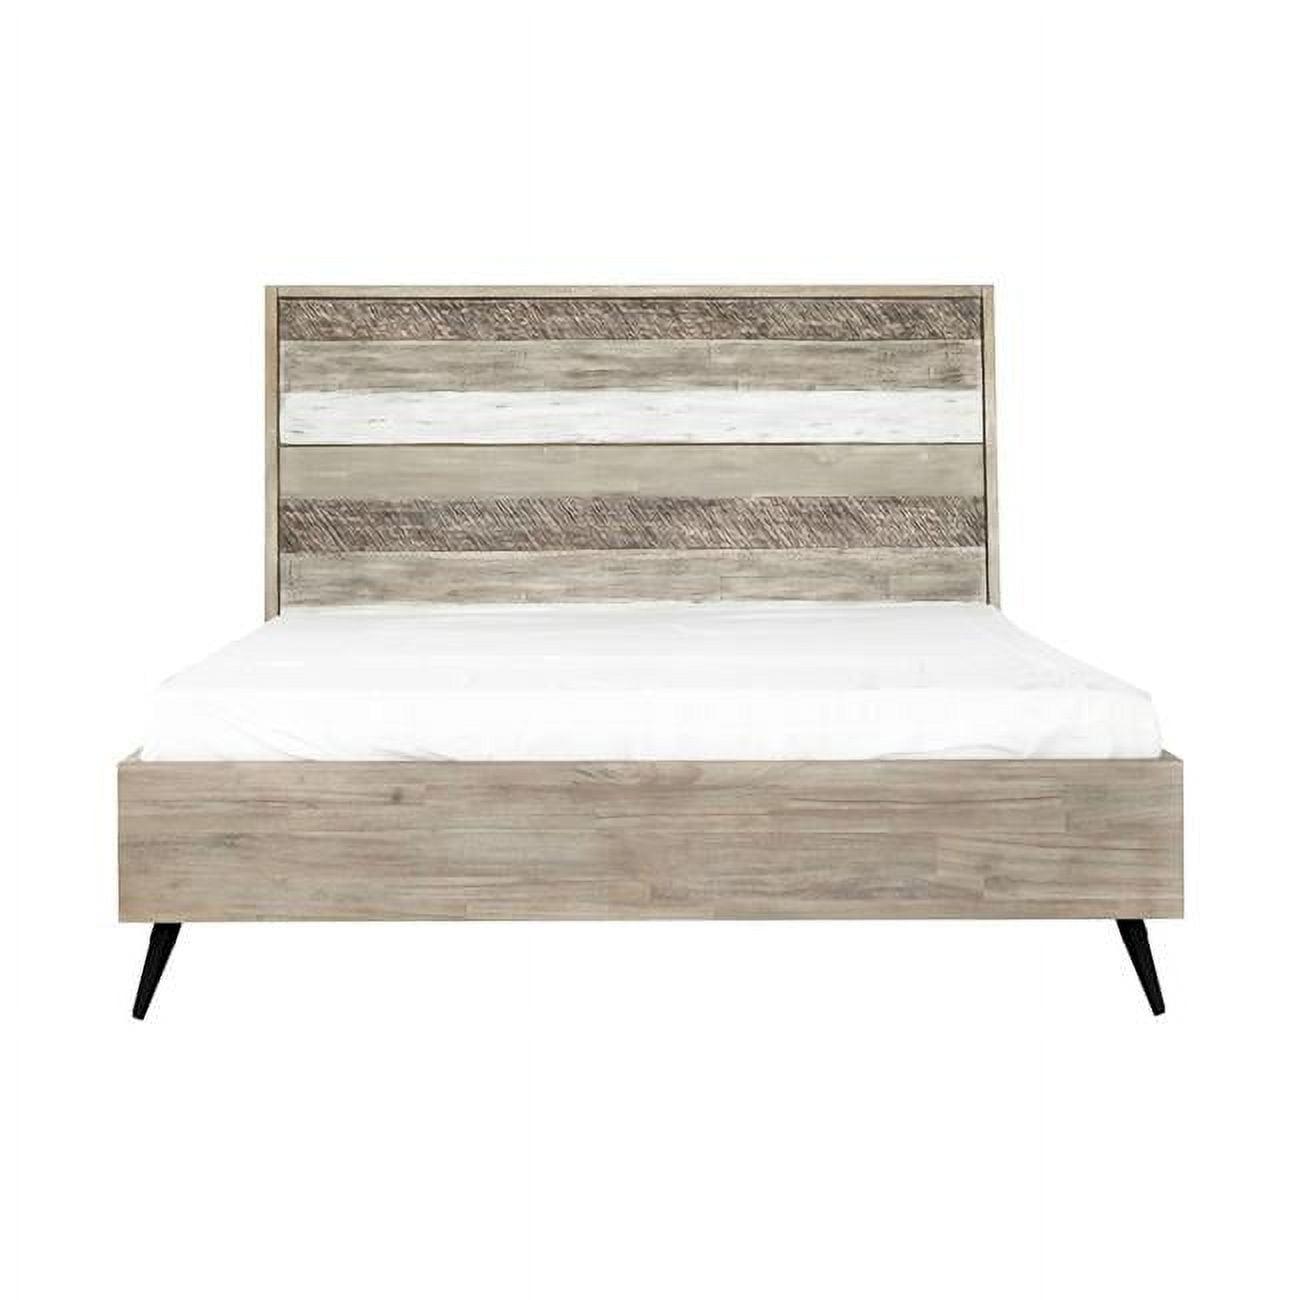 Transitional Two-Tone Acacia Wood King Platform Bed with Headboard